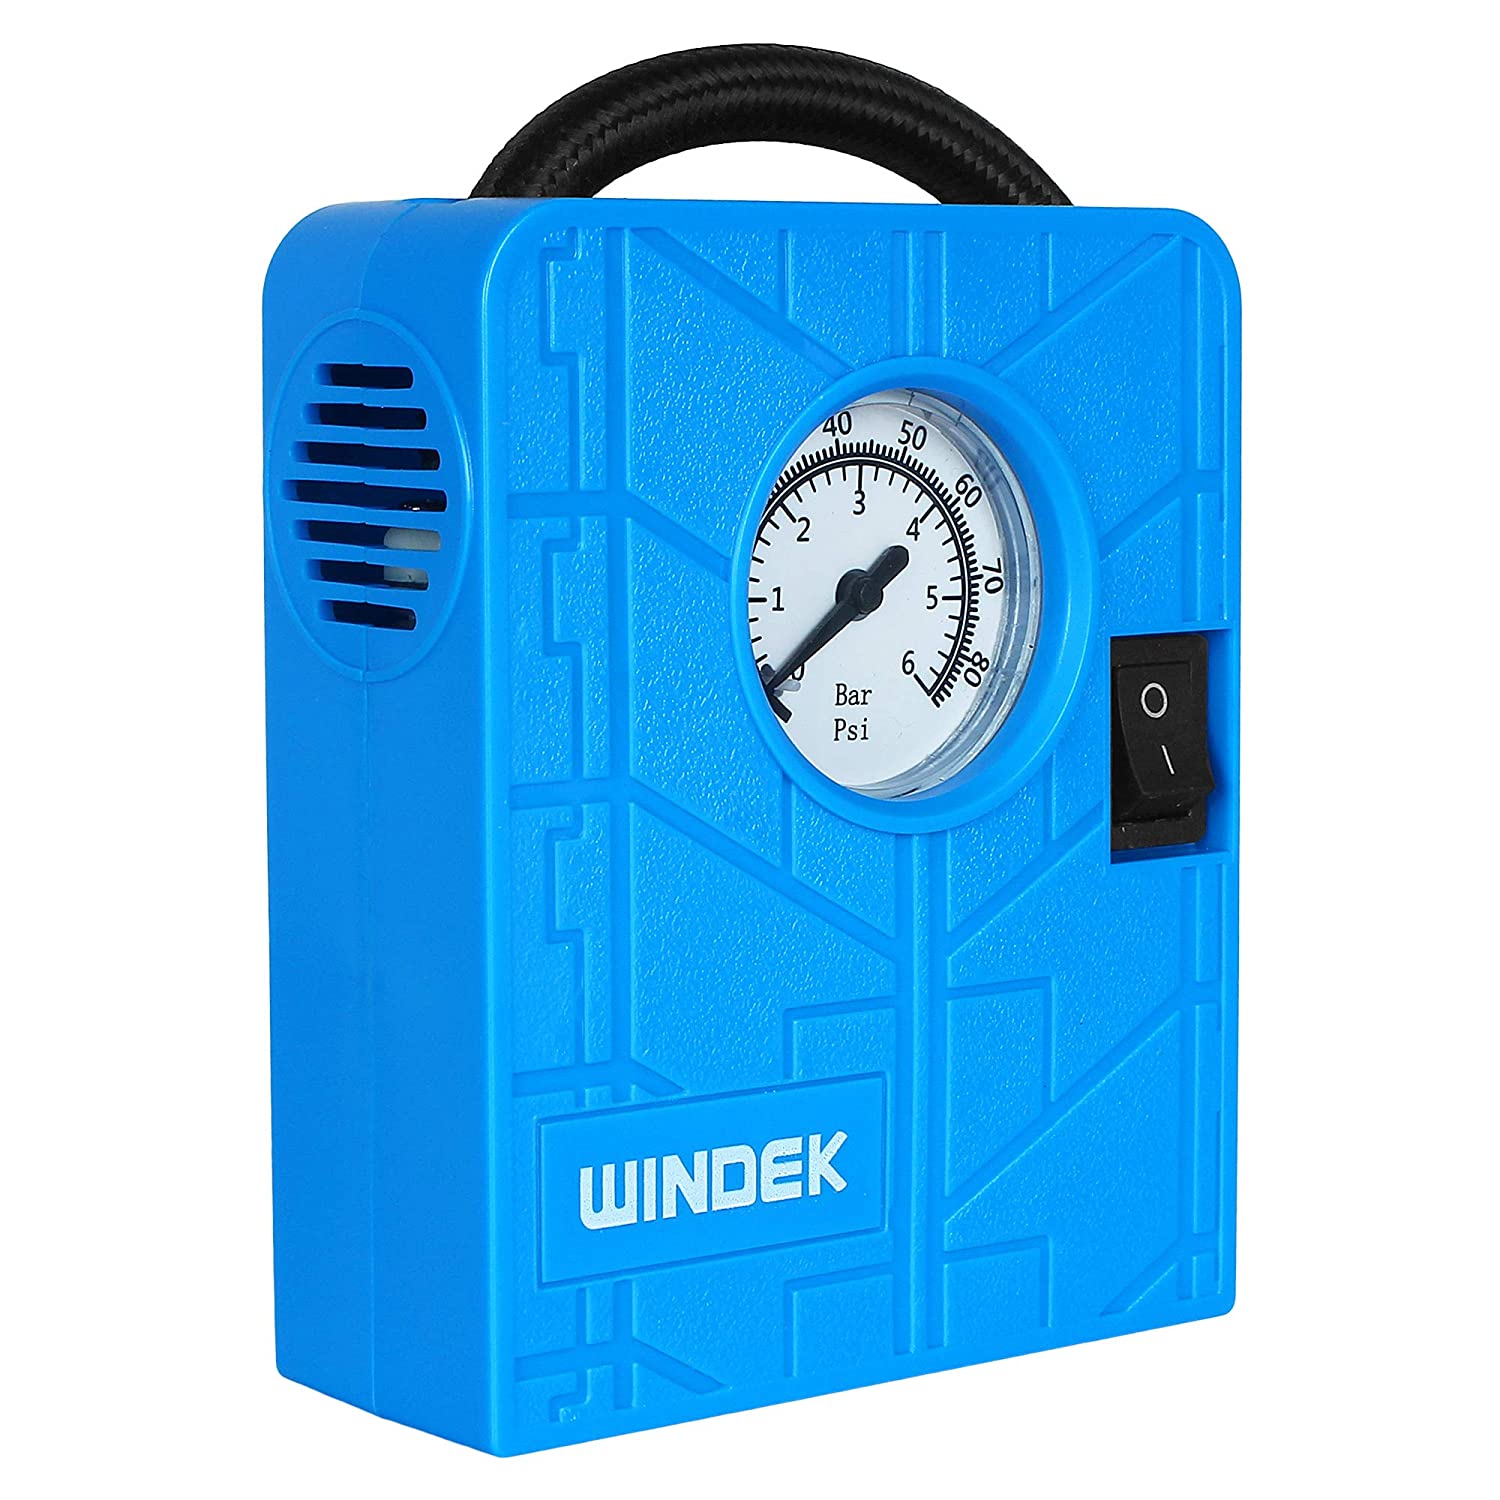 Windek 1500 -12V Portable Mini Air Pump Compressor Tyre Tire Inflator for Car, Bike, Bicycle, Motorcycles, Balls, with LED Light